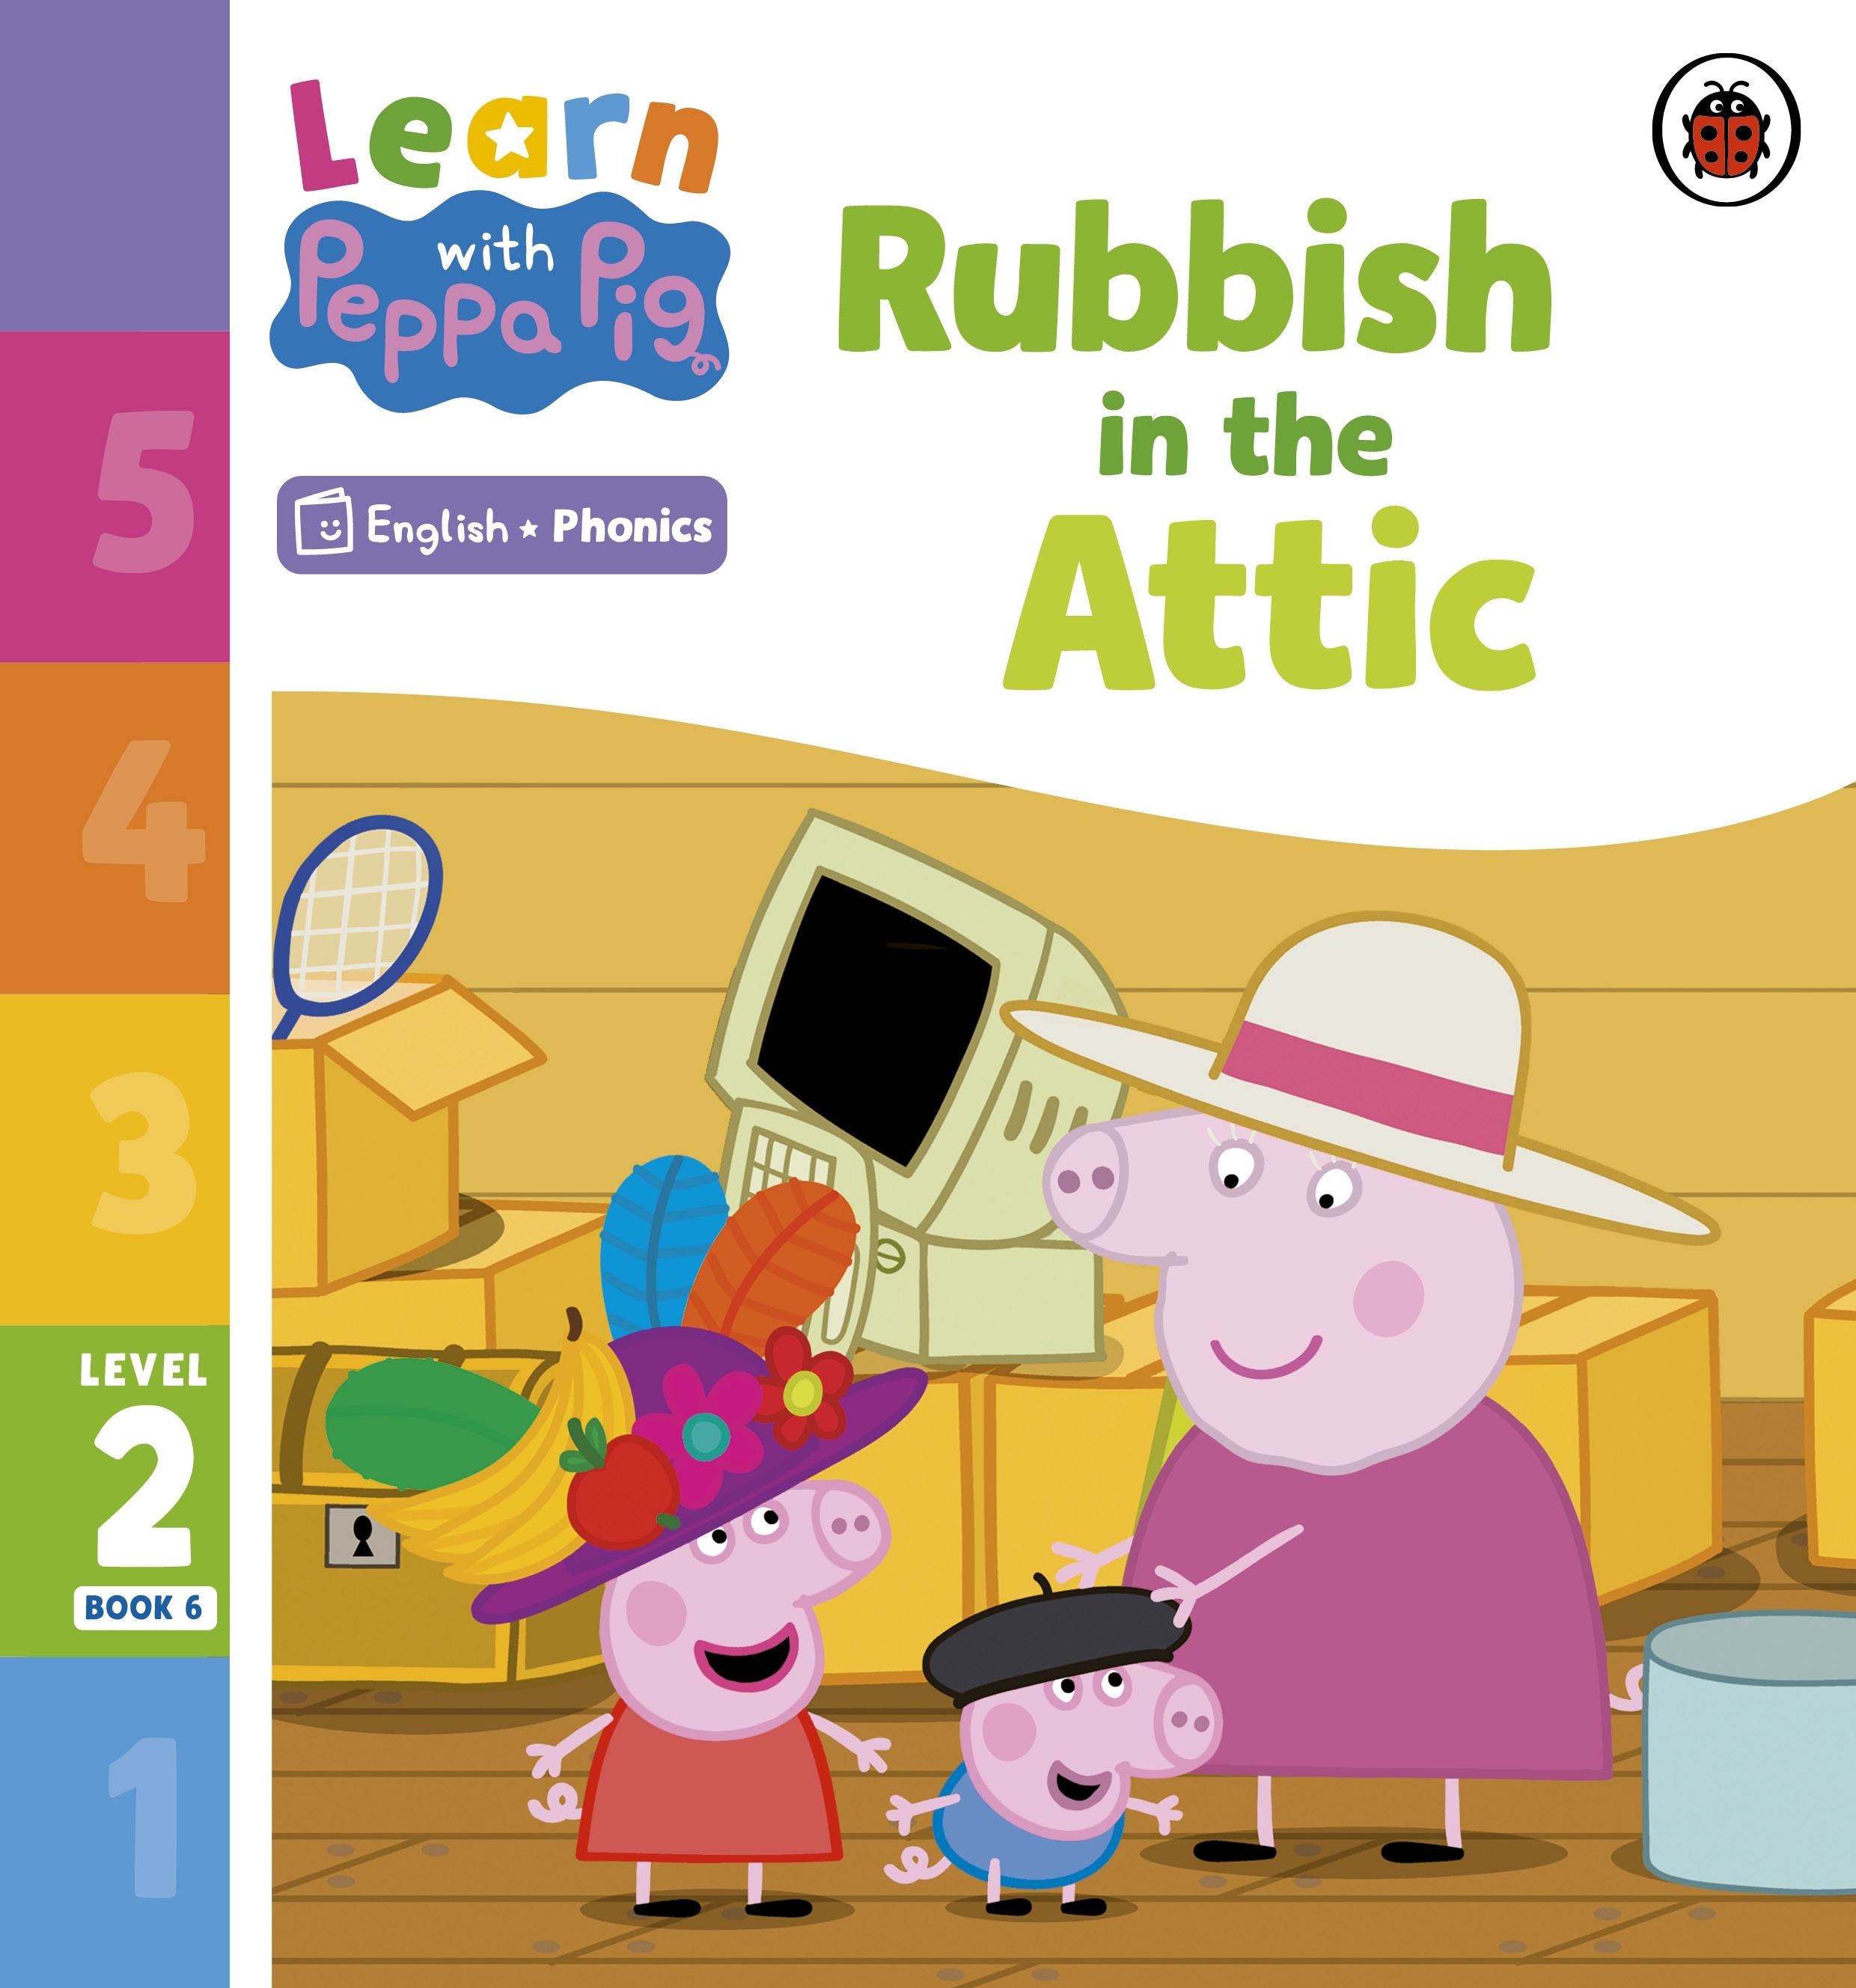 Learn with Peppa Phonics Level 2 Book 6 — Rubbish in the Attic (Phonics Reader)